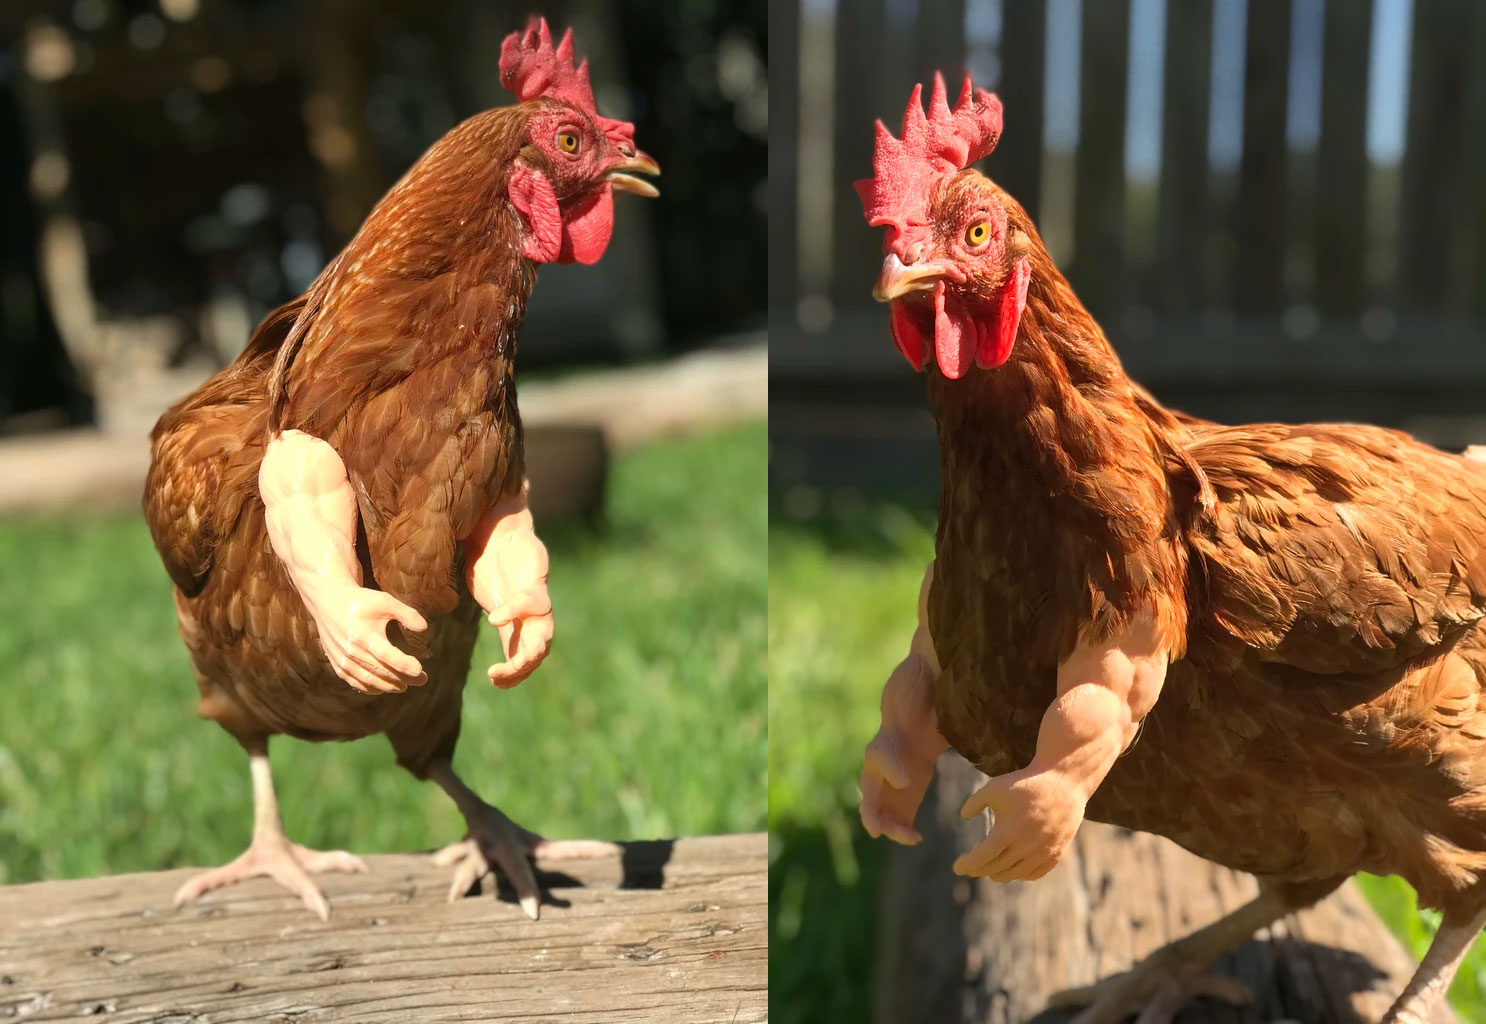 Funny fake chicken arms - Muscular chicken arms